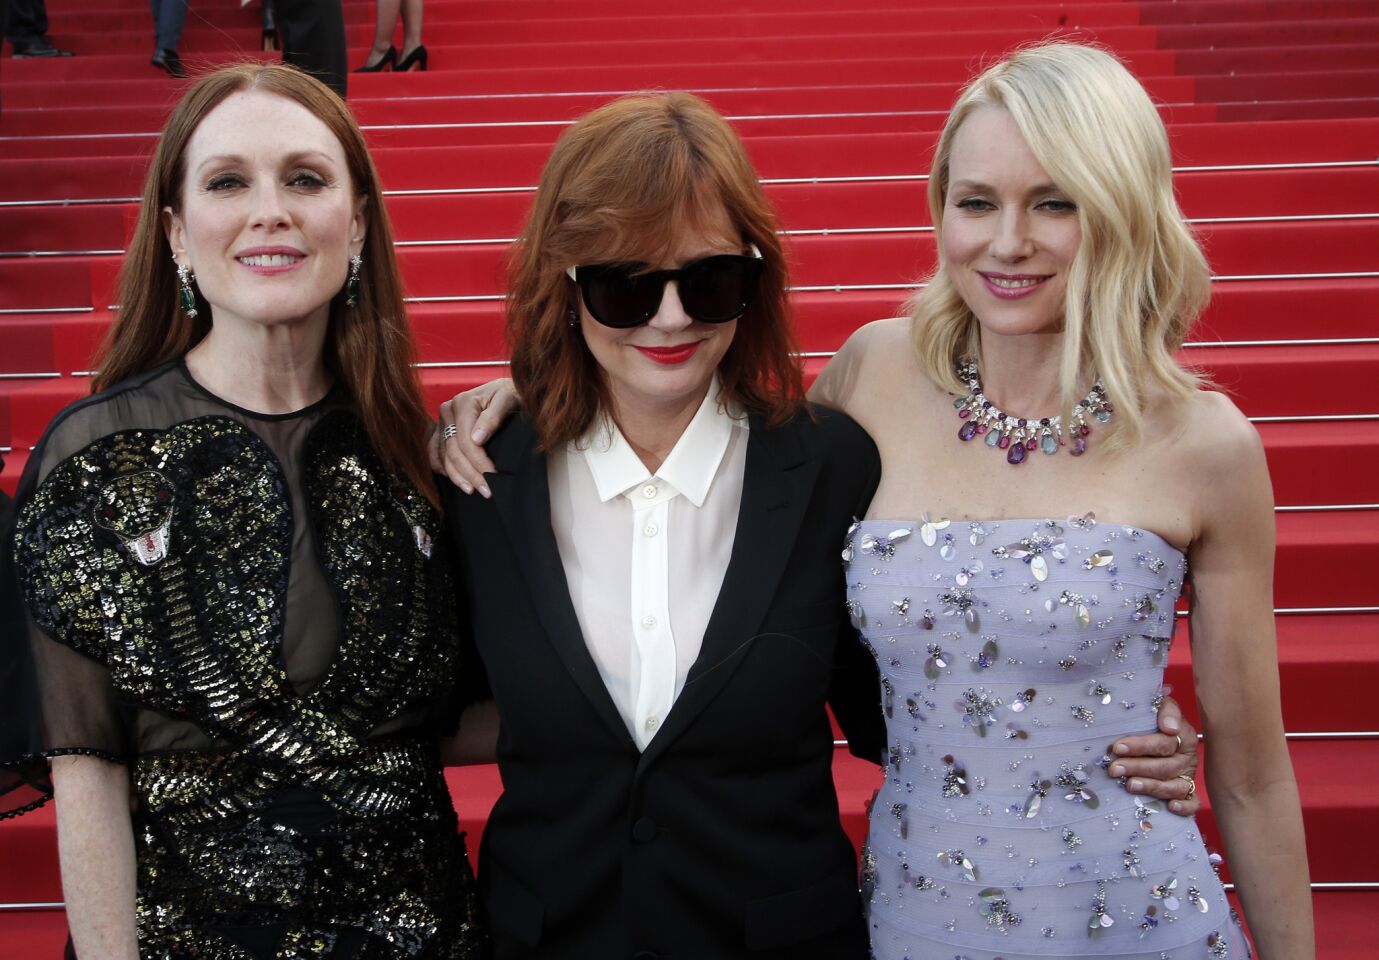 From left, actresses Julianne Moore, Susan Sarandon and Naomi Watts pose for photographers at the Cannes Film Festival screening of Woody Allen's "Cafe Society" on Wednesday.